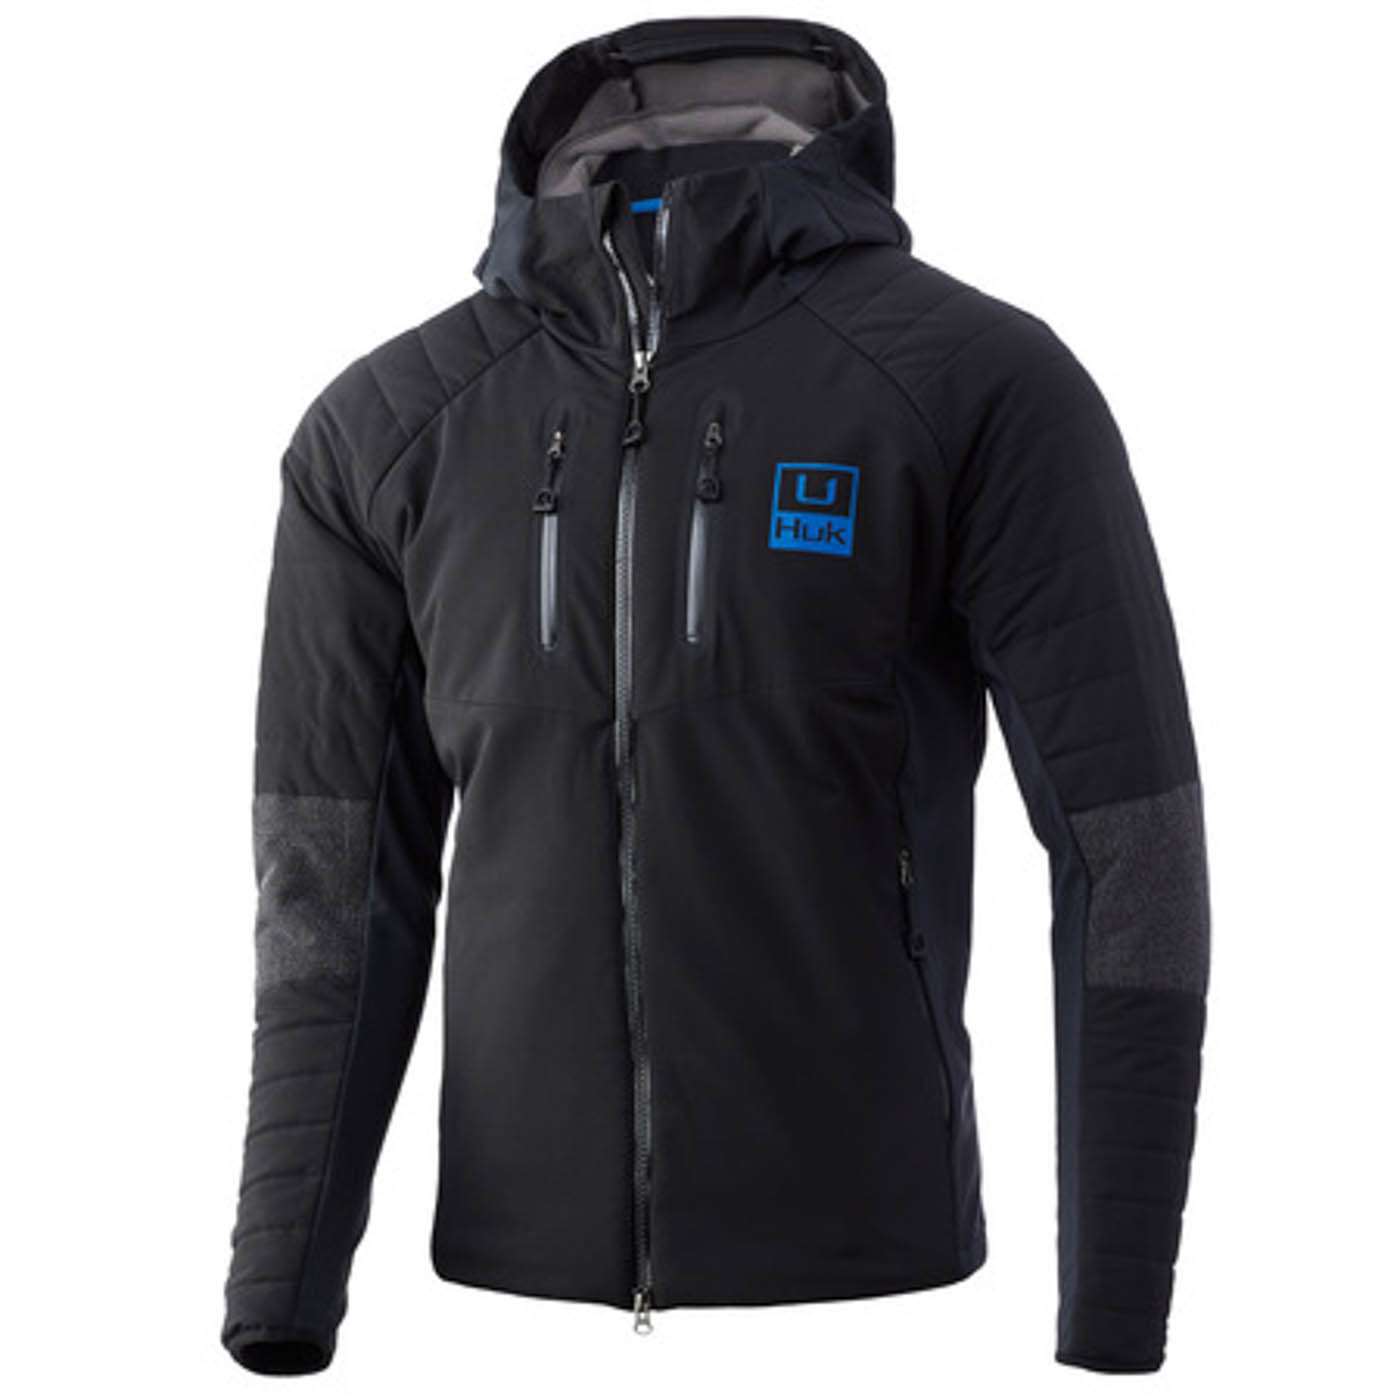 <p><strong>Huk Icon X Superior Hybrid Jacket </strong></p><p>The Icon X Superior Hybrid Jacket is 100% wind proof and water resistant. It features Primaloft Insulation for warmth, an articulated hood, adjustable cuffs, and fog free breathable perforation.  The two chest pockets zip for security, and there are also two hand warmer pockets.  Pit zips provide the ability to further regulate body temperature as needed.  Additionally, it has Icon X reflective tape for added safety. $200 ($210 for 3XL). <a href=